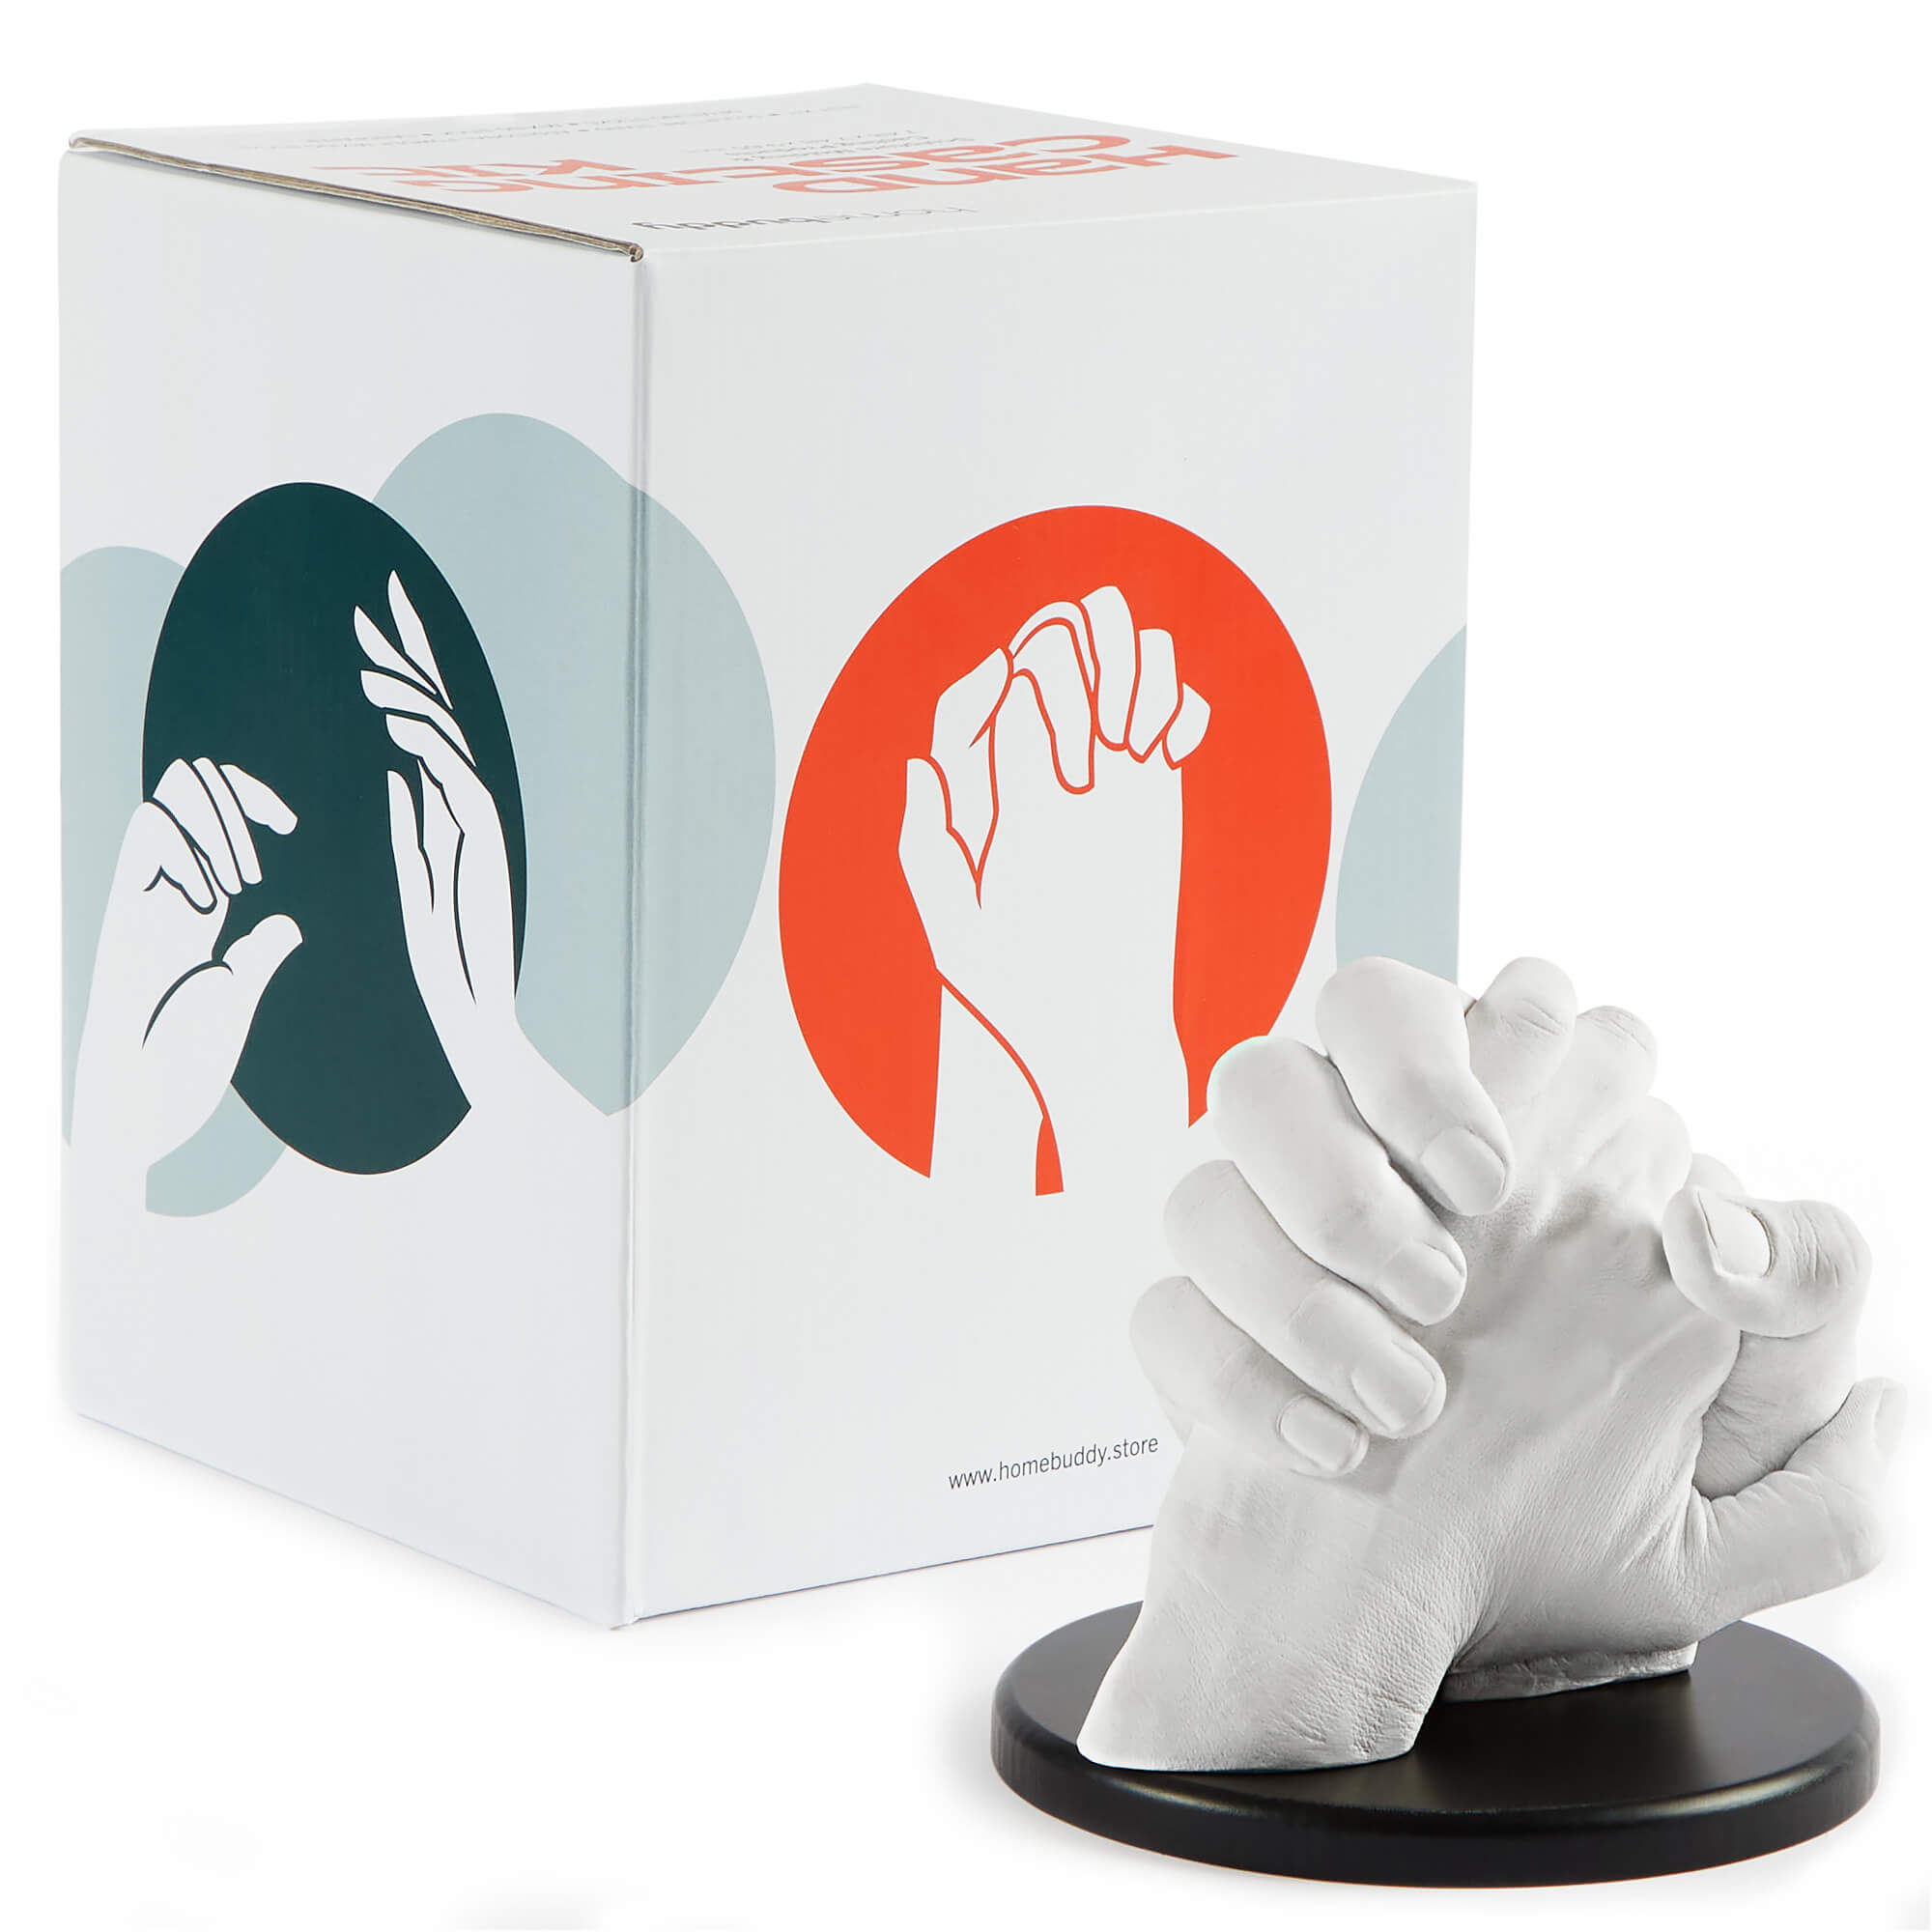 Hand Casting Kit - Complete Hand Molding with Plaster, Bucket